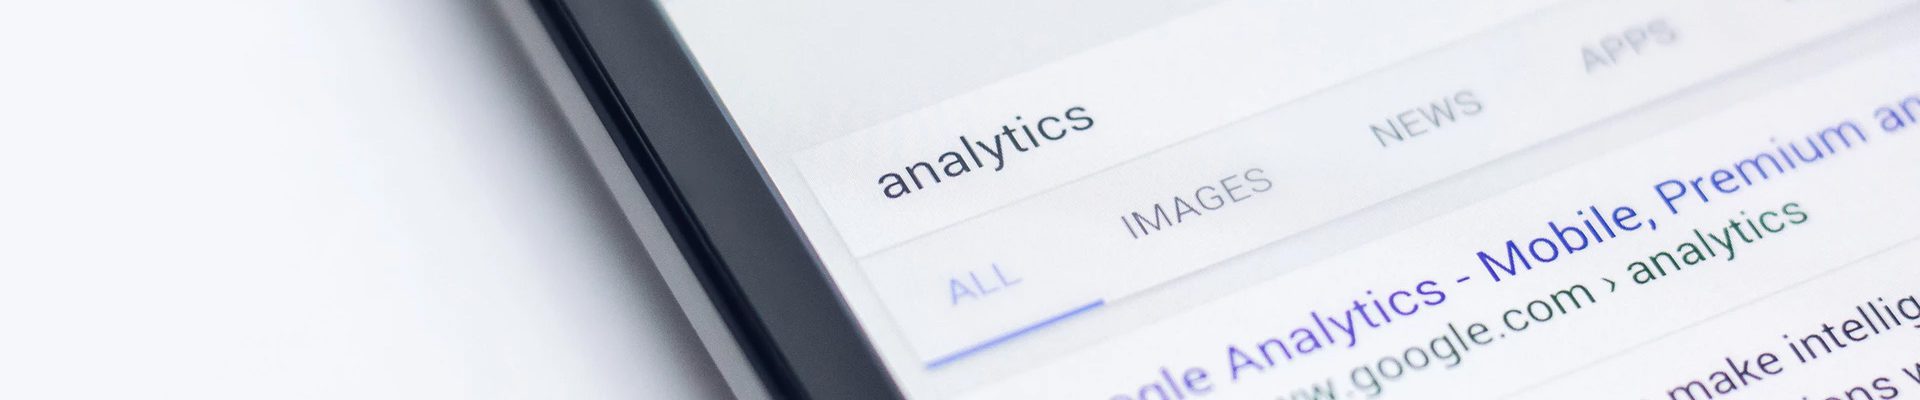 By using the latest analytics and ad technology we can better understand which mediums work best for your business